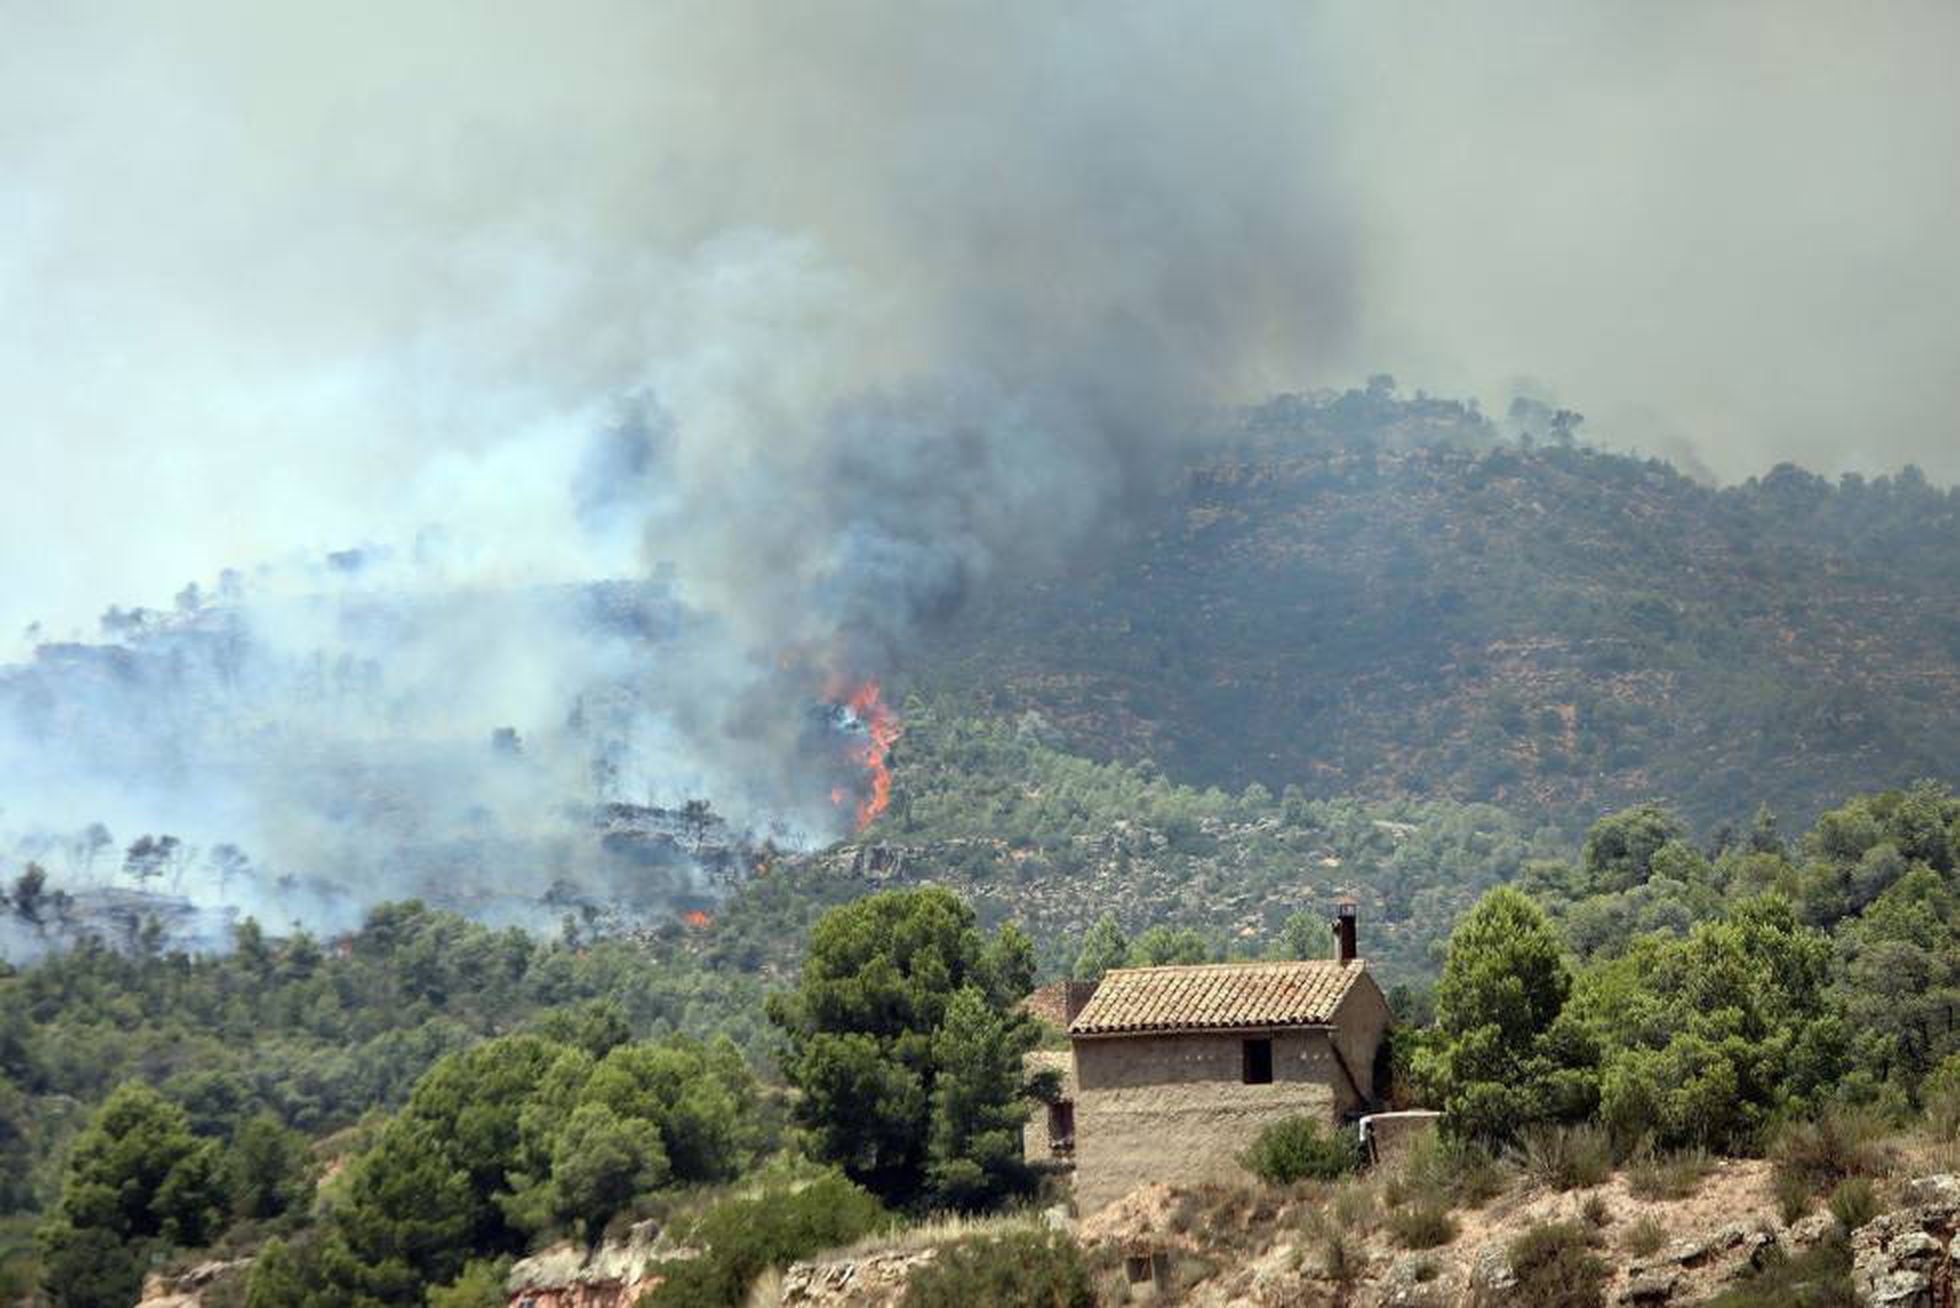 Wildfire in Tarragona Firefighters continue to battle Spanish wildfire